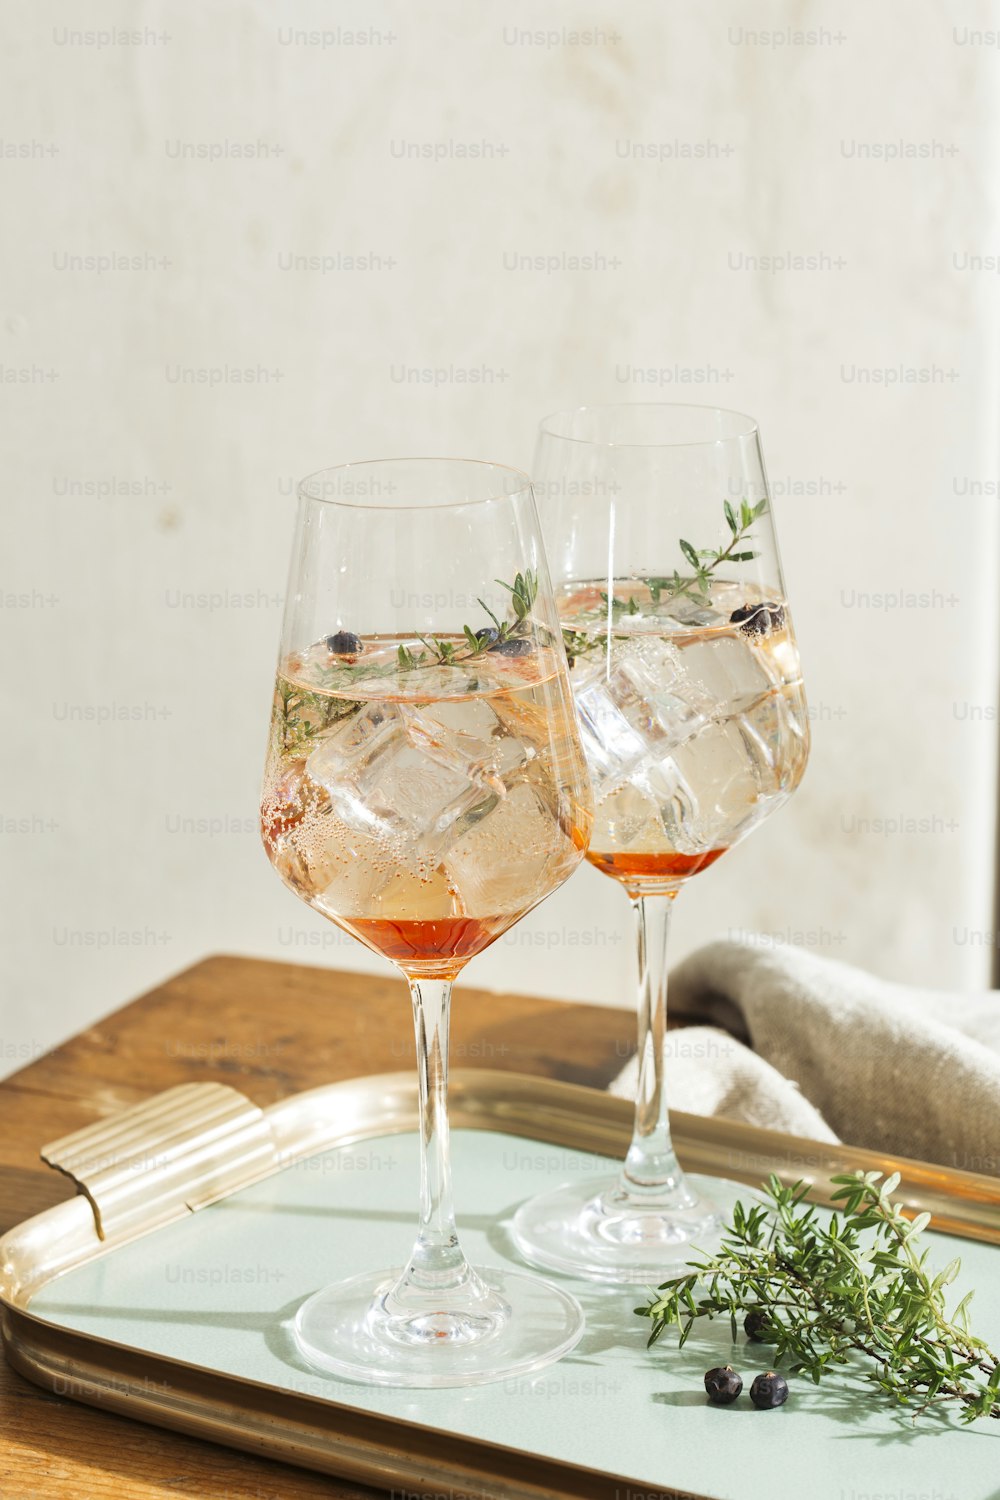 Prosecco cocktail, aperitif with Prosecco a white sparkling italian wine, bitter, thyme and juniper berries; Prosecco, lime and lavender; and Prosecco, orange and rosemary